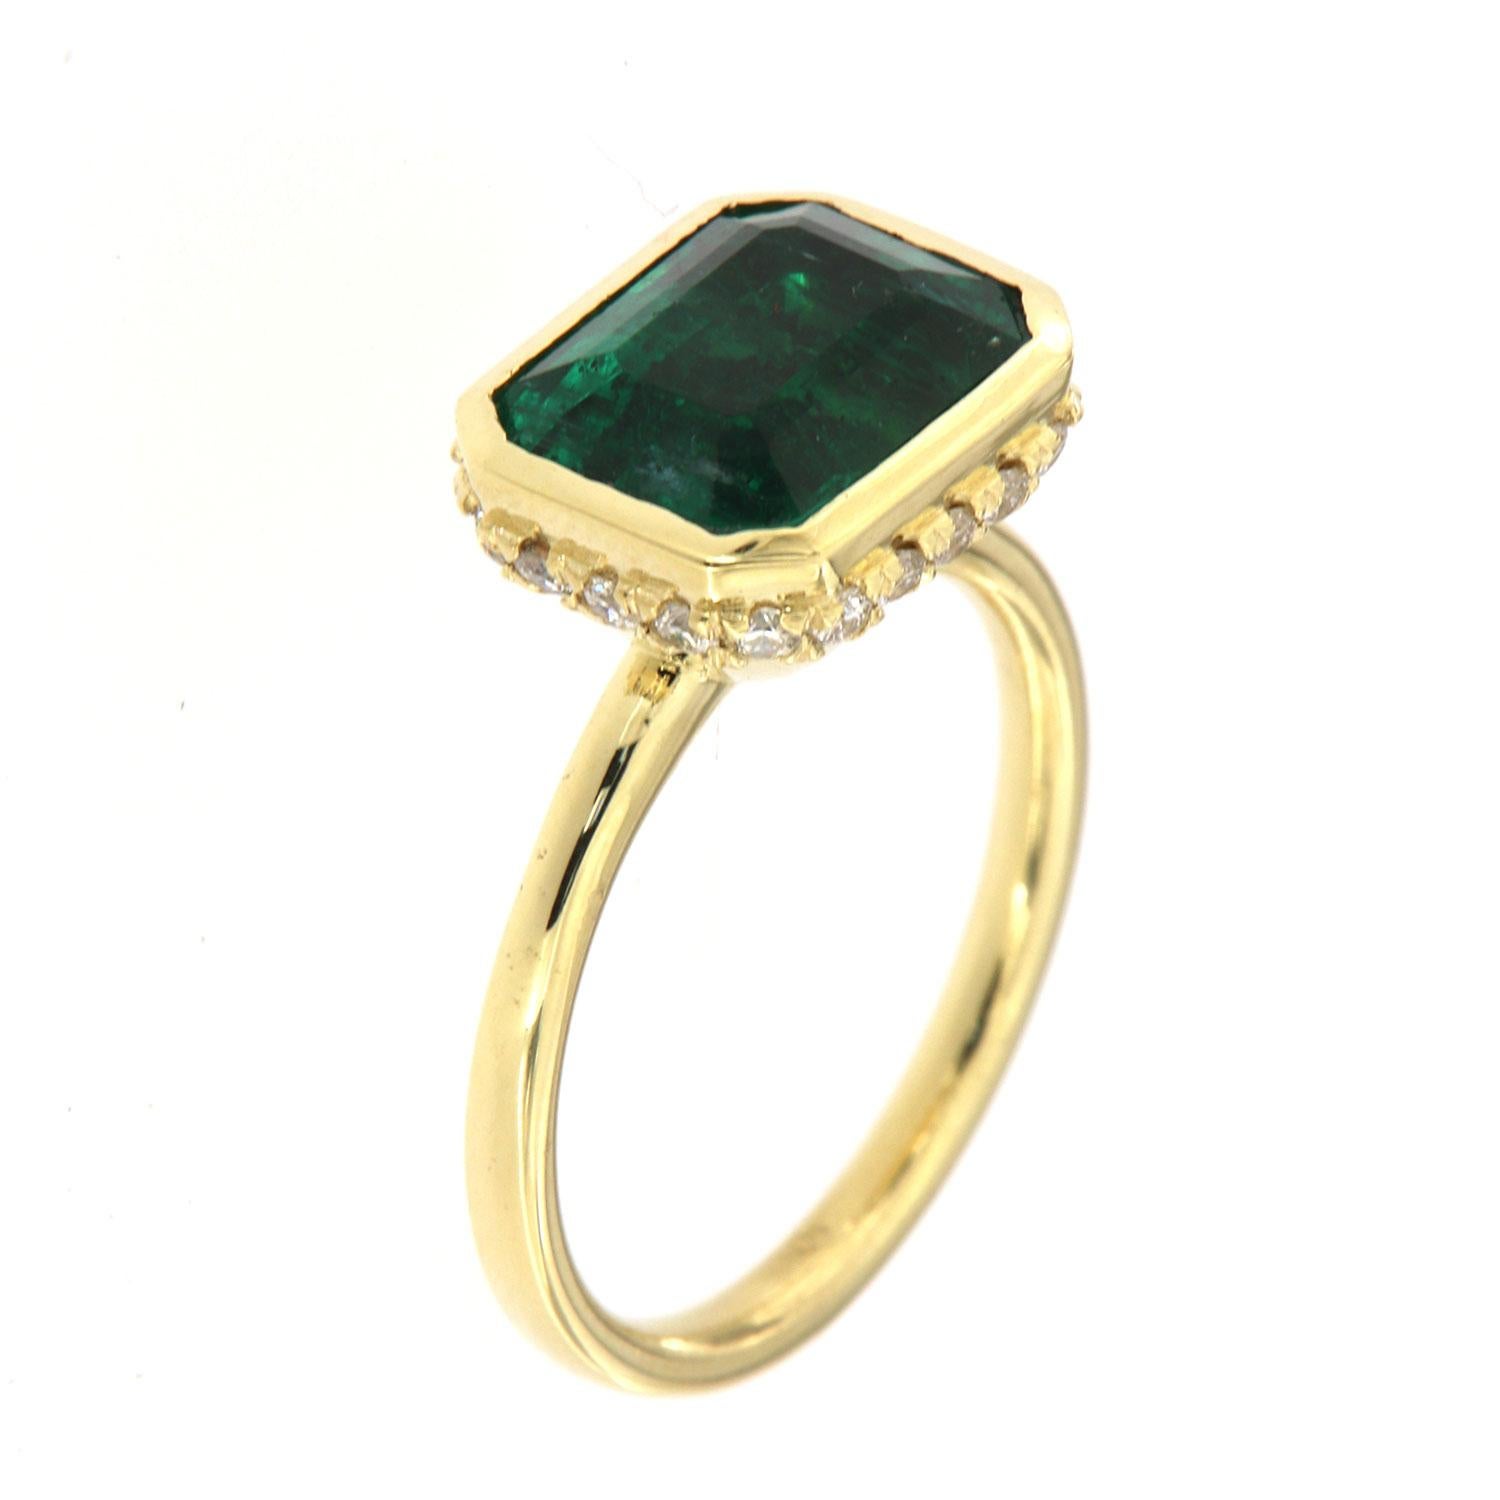 This 18k yellow gold delicate ring features a 3.93 Carat Vibrant green Zambian emerald cut Emerald bezel set East-West style. Twenty-one (21)Brilliant round diamonds are micro-prong set in a hidden halo on the crown to create the sparkle look every